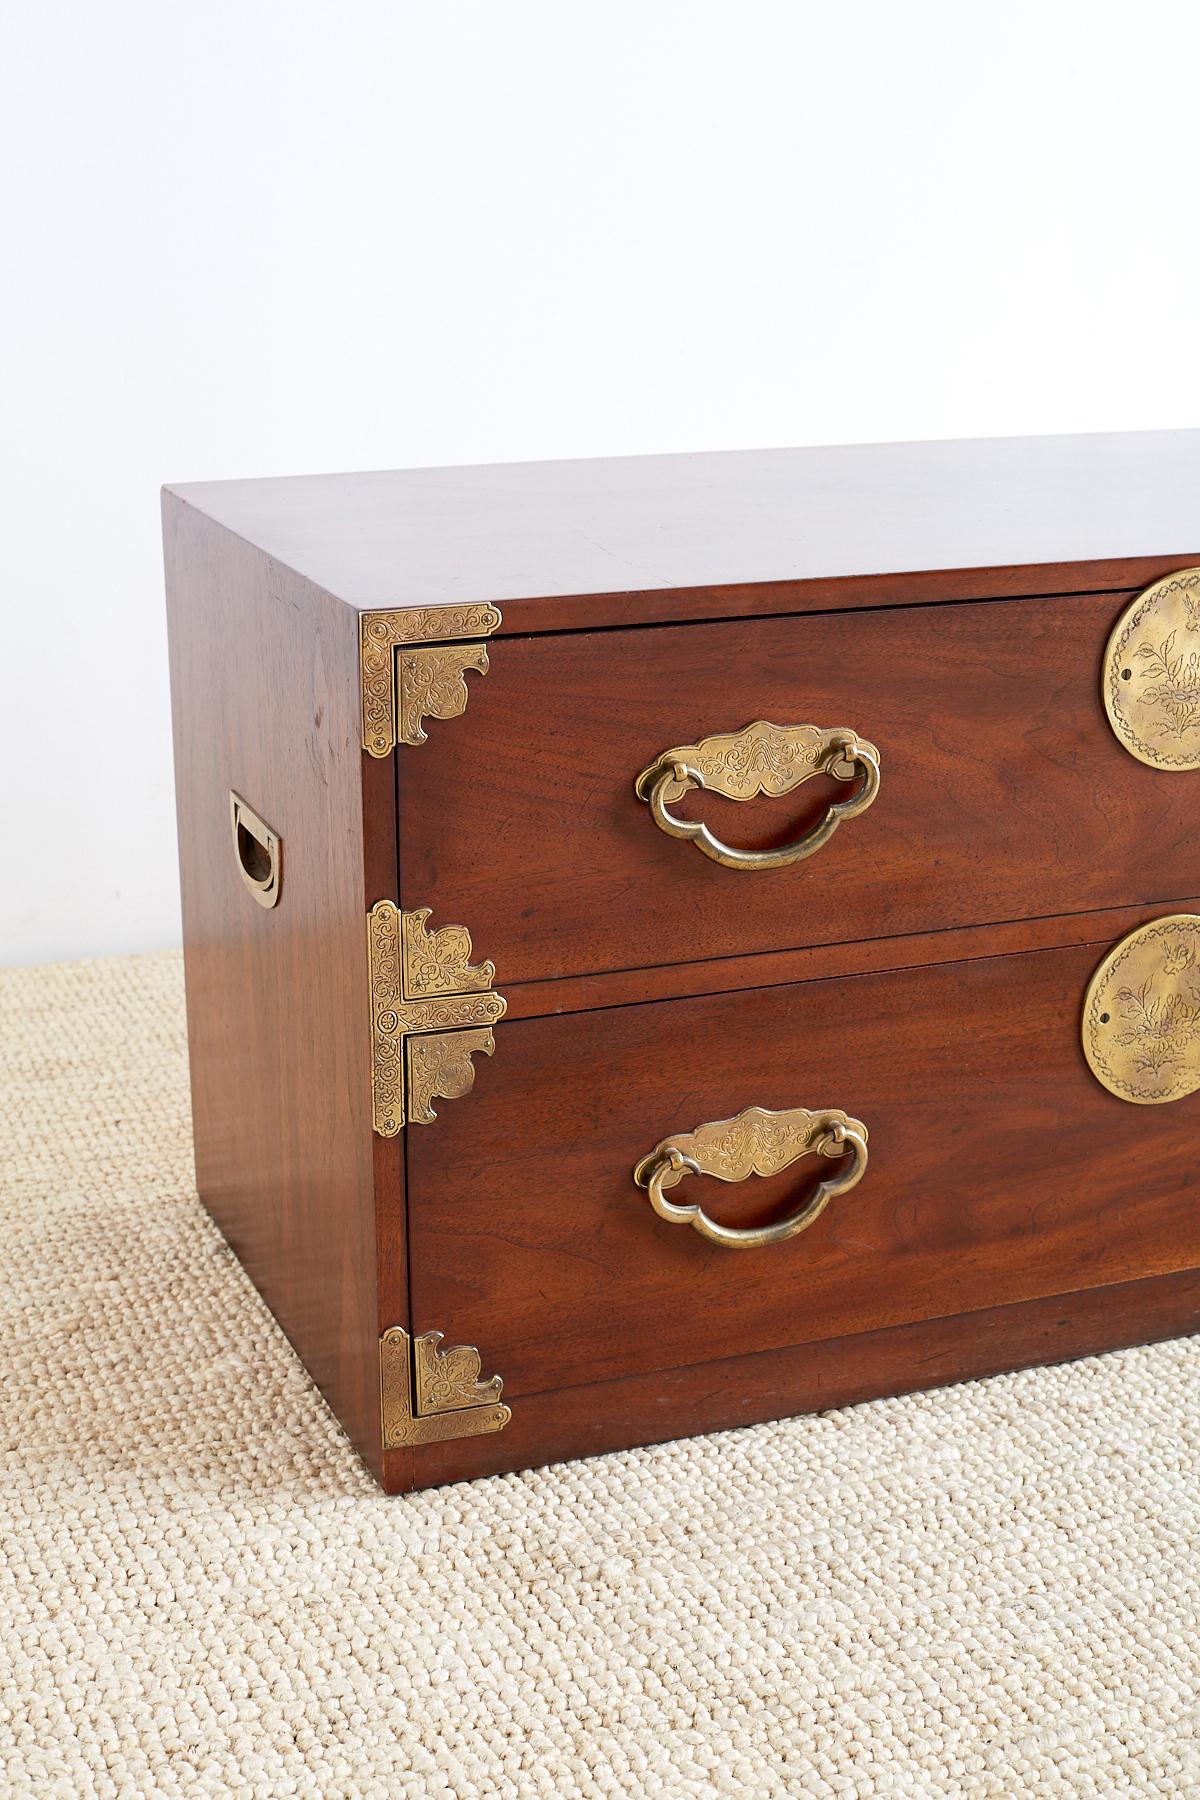 Hand-Crafted Henredon Tansu Style Mahogany Campaign Chest